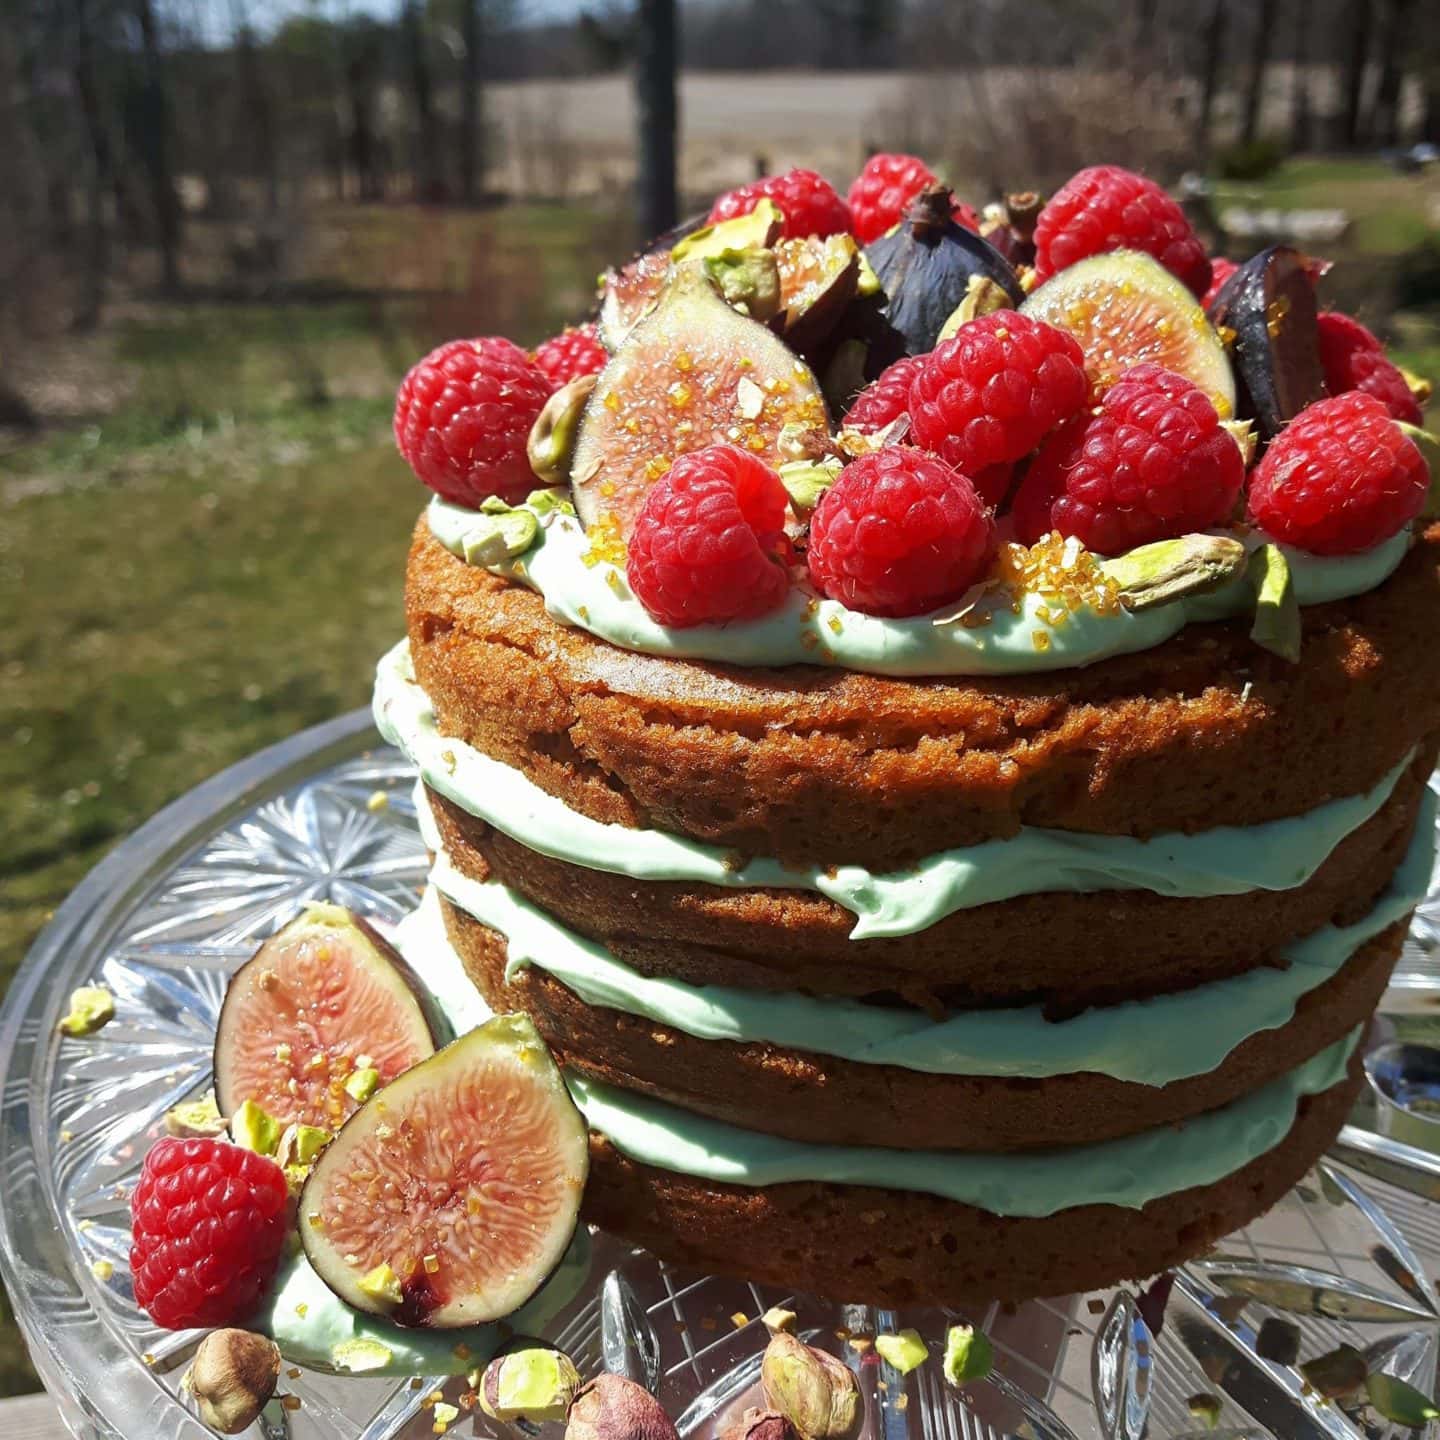 Edible Options layered vegan cake with pistachio cream topped with fruit